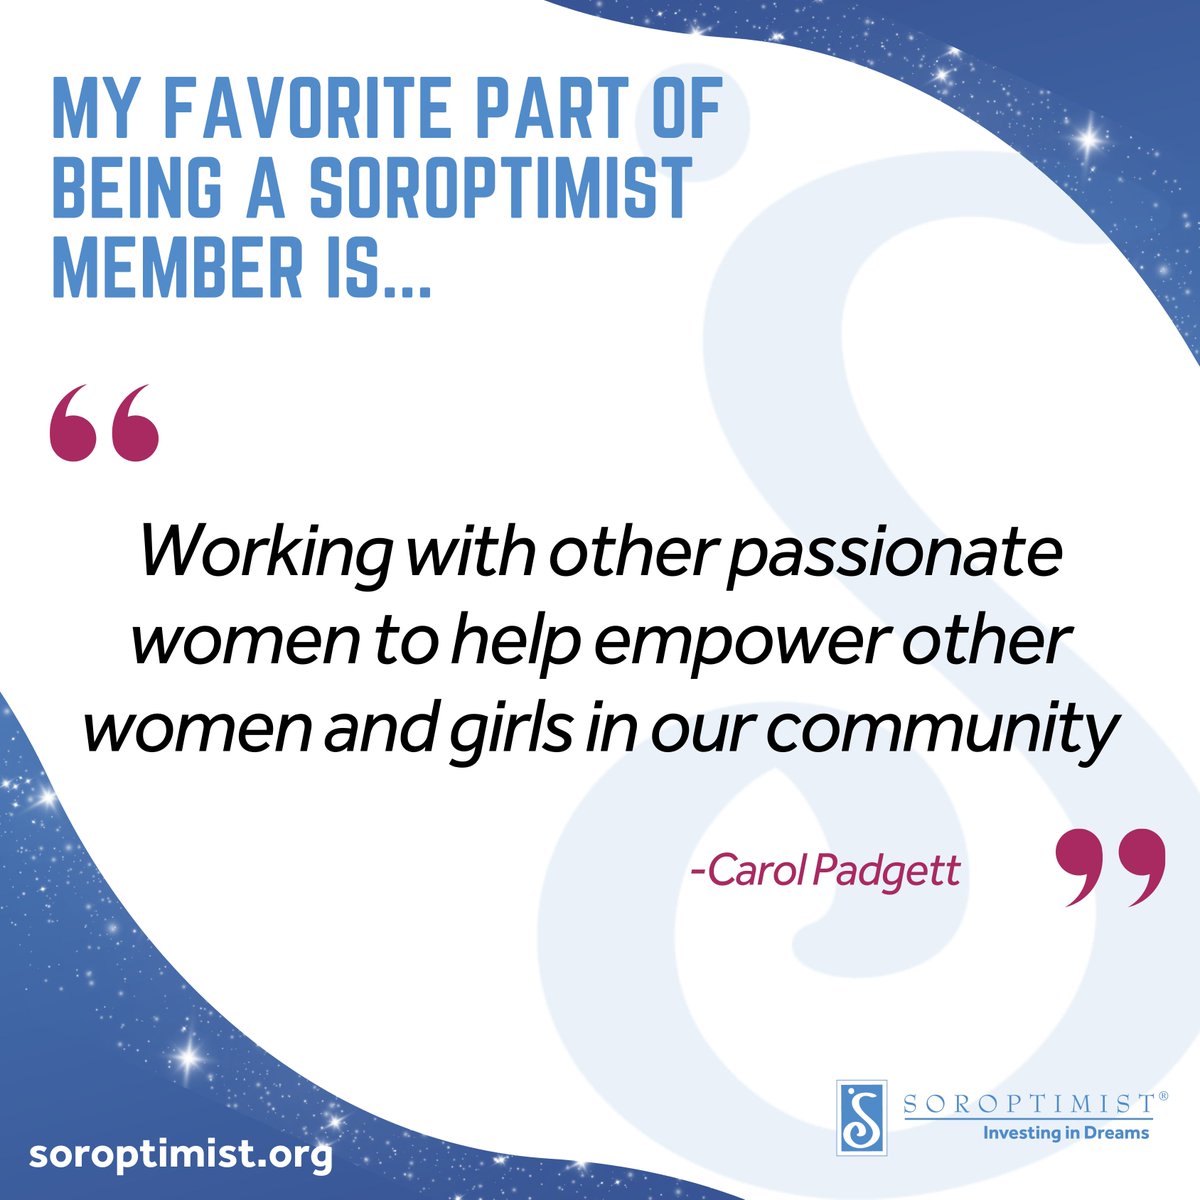 Thank you Carol for sharing why you love being a Soroptimist member! Let us know your favorite part this week for #SIAVolunteerWeek 💙